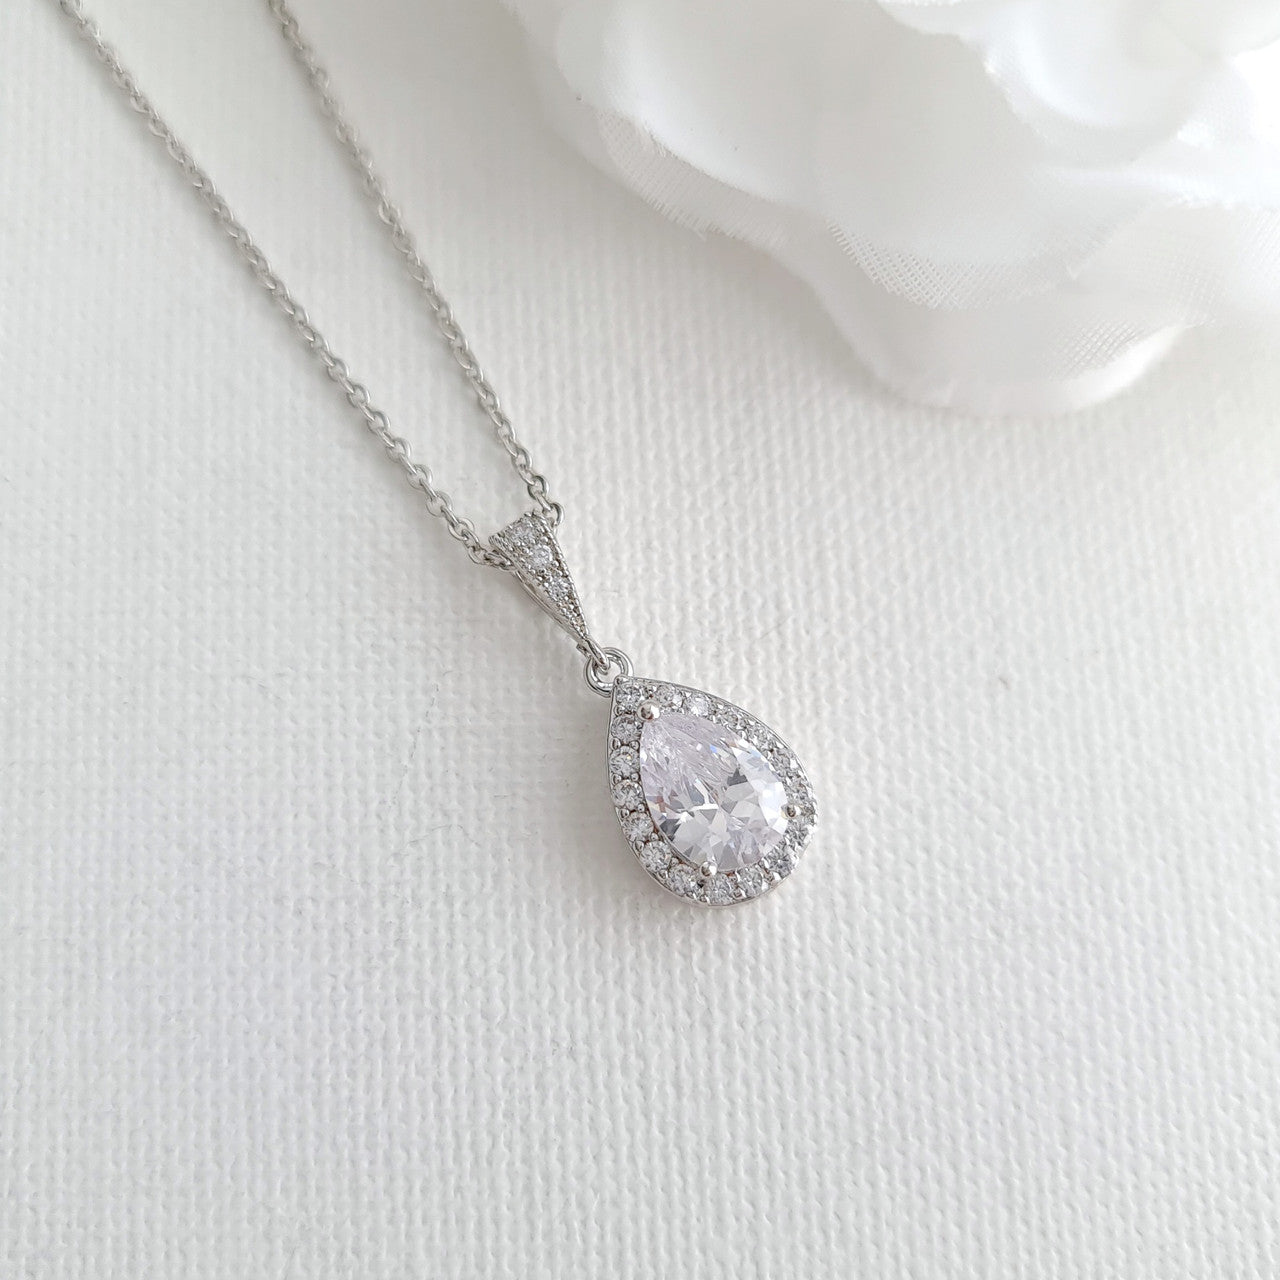 Rose Gold Necklace with Small Teardrop Pendant-Emma